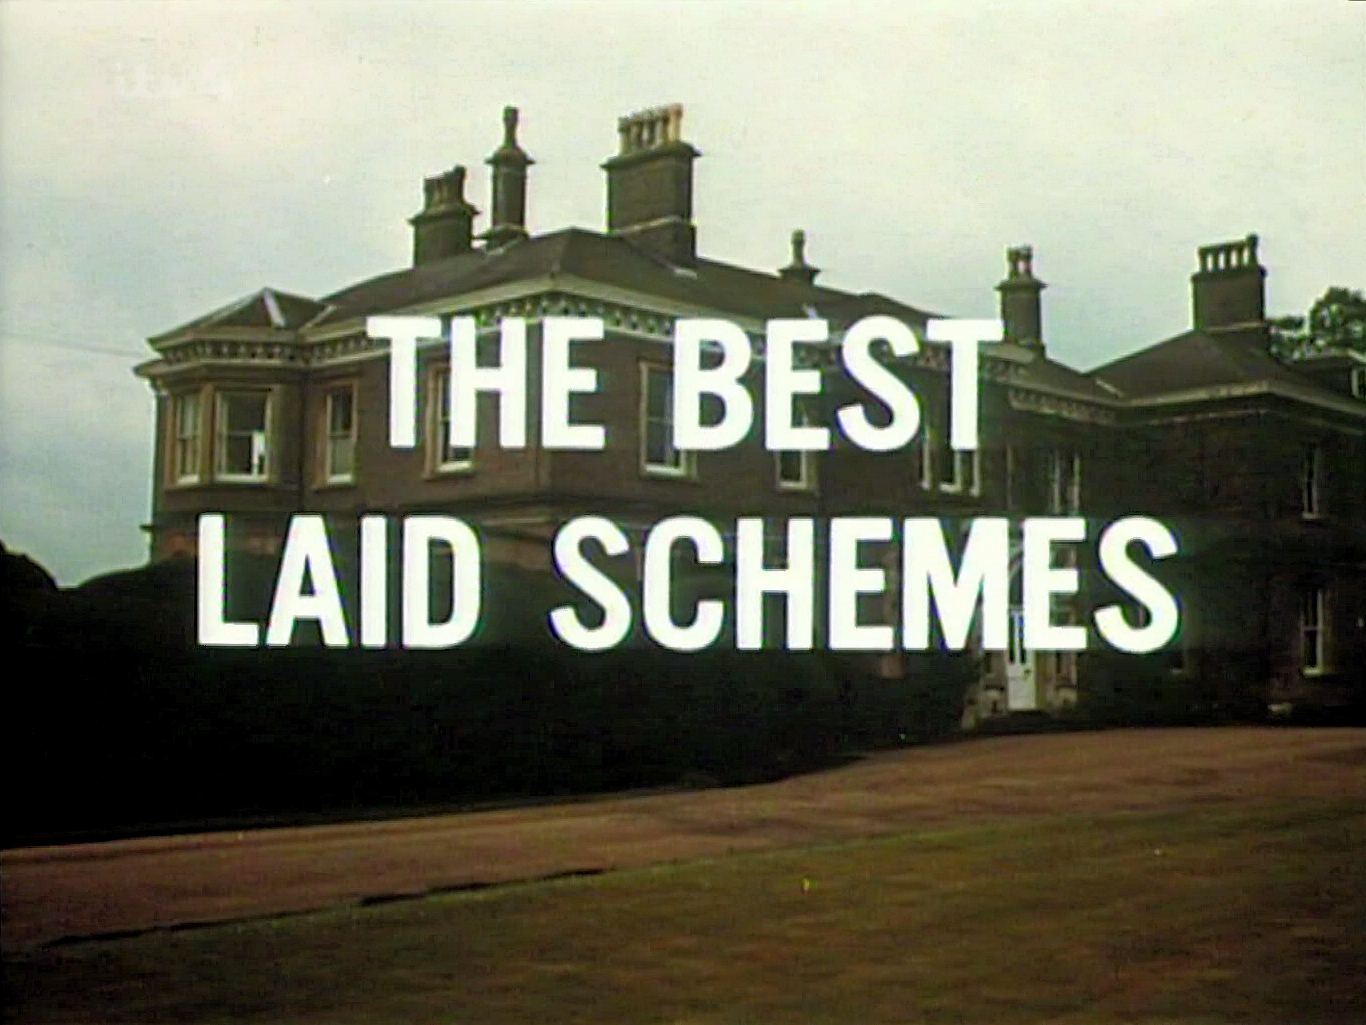 Main title from the 1967 ‘The Best Laid Schemes’ episode of The Saint (1962-69) (1)